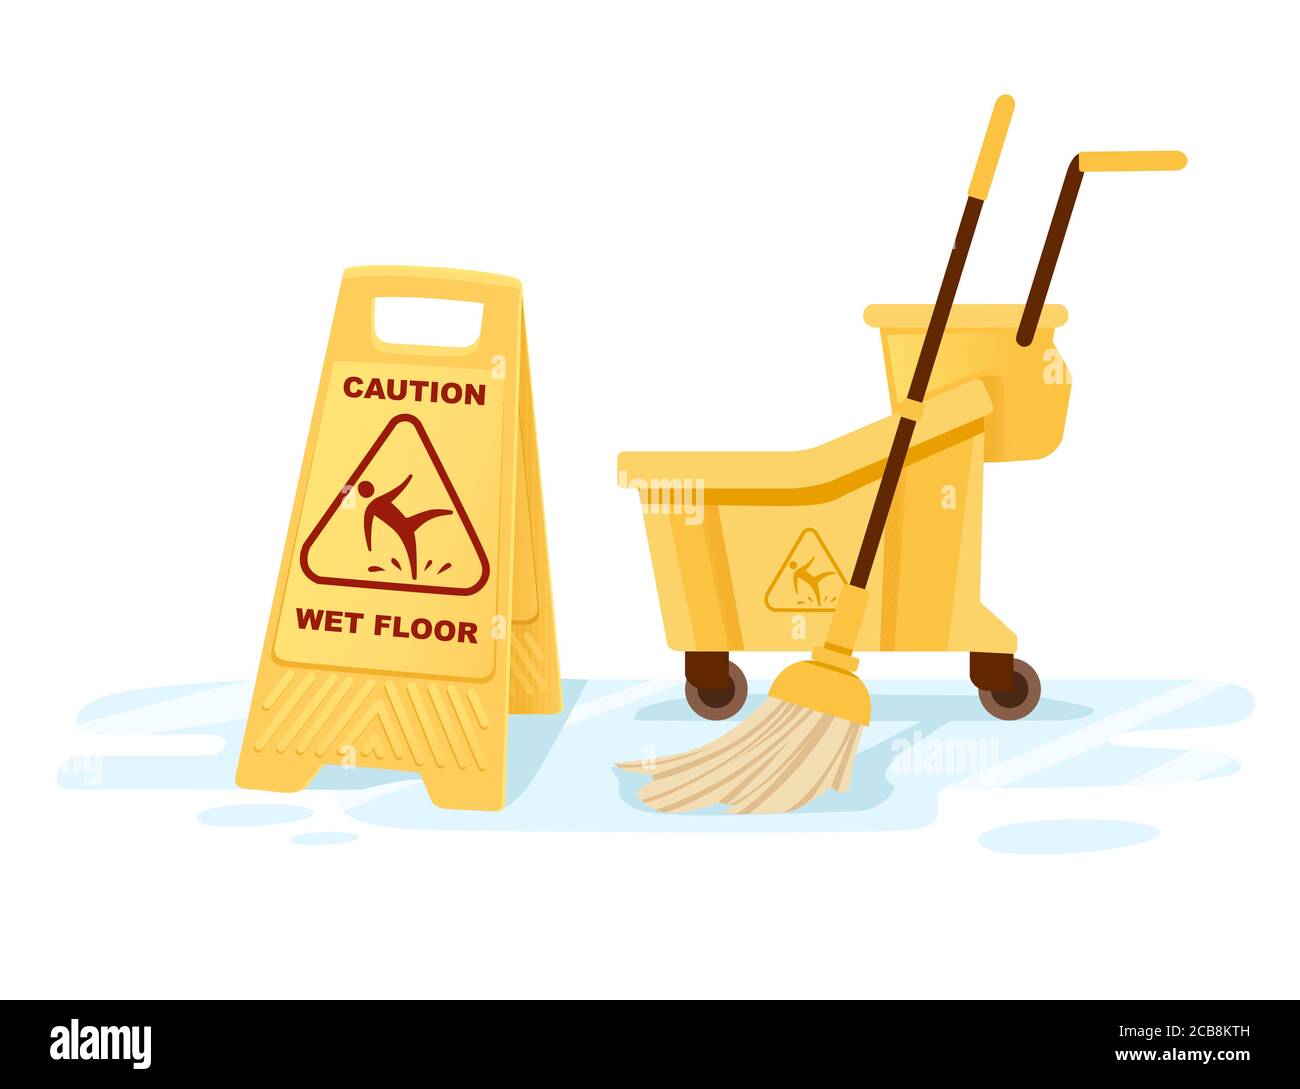 Group of cleaning tools wet floor sign mop bucket cleaning supplies flat vector illustration on white background Stock Vector